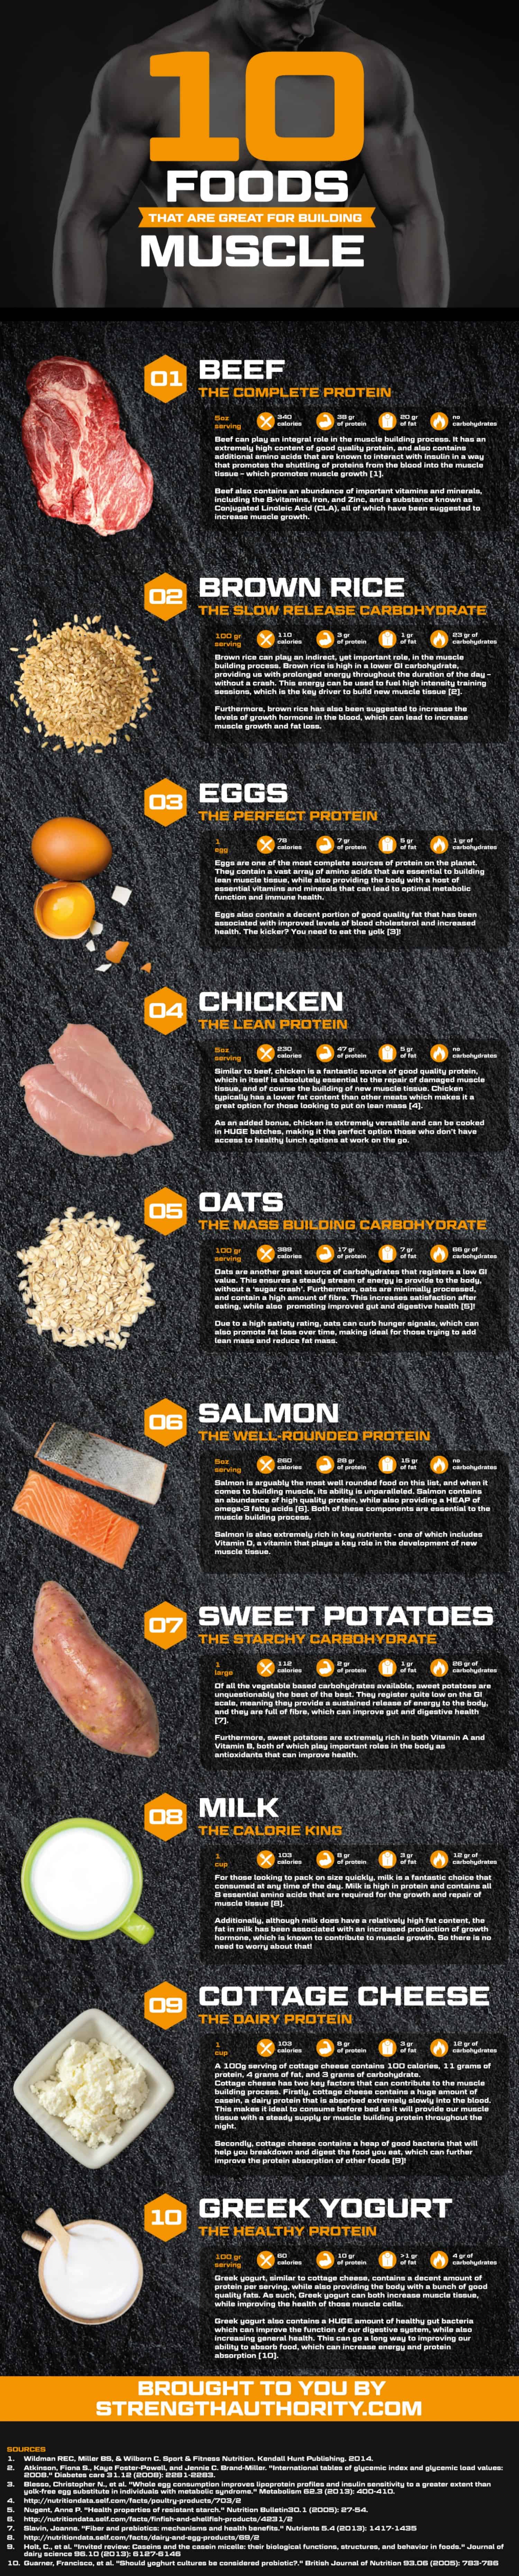 10 Foods That Are Great For Building Muscle Daily Infographic